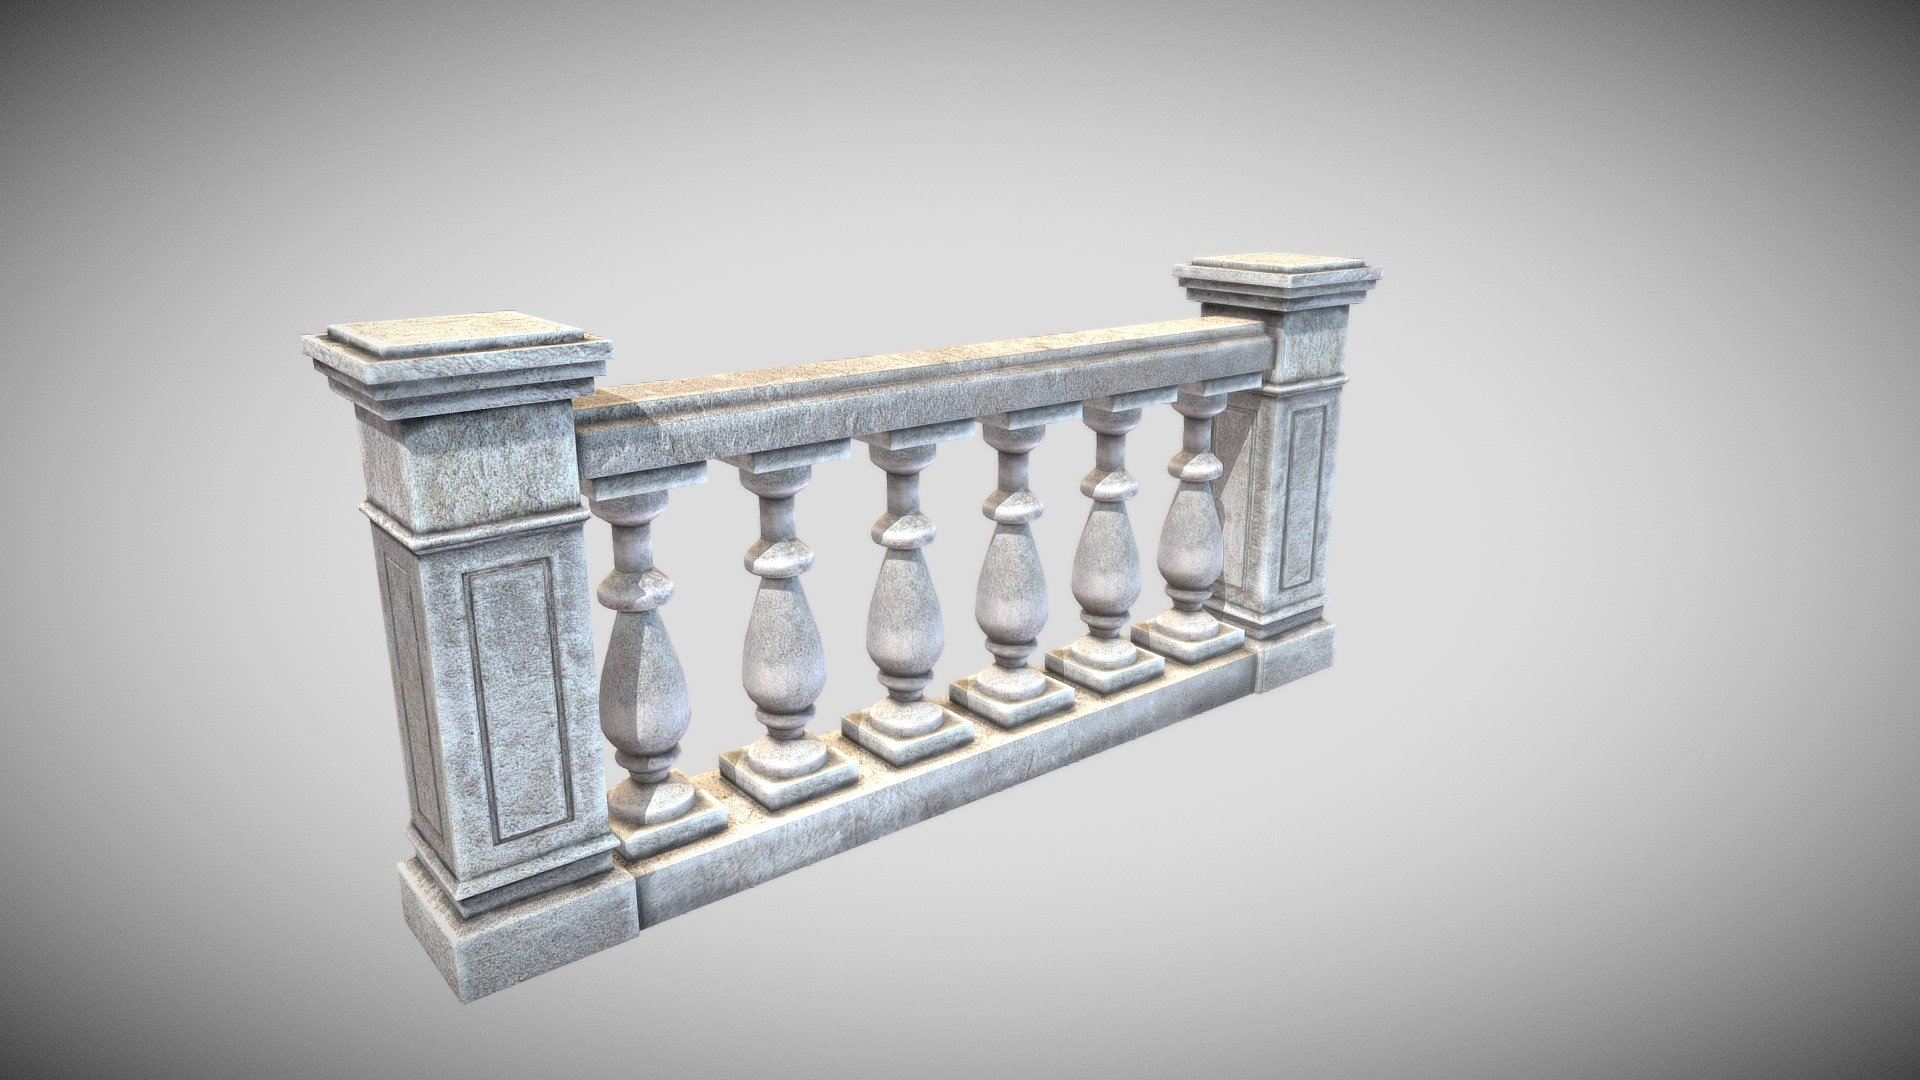 Low-poly, Stone Balcony Balustrade, complete with full 4K textures. Realistic and ready for games and stonework architectural terrace renders. Clean architecture topology with 9769 Vertices and 9540 faces.

The Stone Balcony Balustrade model is available in the following file formats: .blend (native), .fbx, .dae, .obj and .stl formats for extra flexibility. This model is perfect for modular kit building - next-gen historical games, fantasy, roman, etc. This Stone Balcony Balustrade model works very well with both eevee and cycle rendering - Balcony Balustrade - Buy Royalty Free 3D model by jamesmiddz 3d model